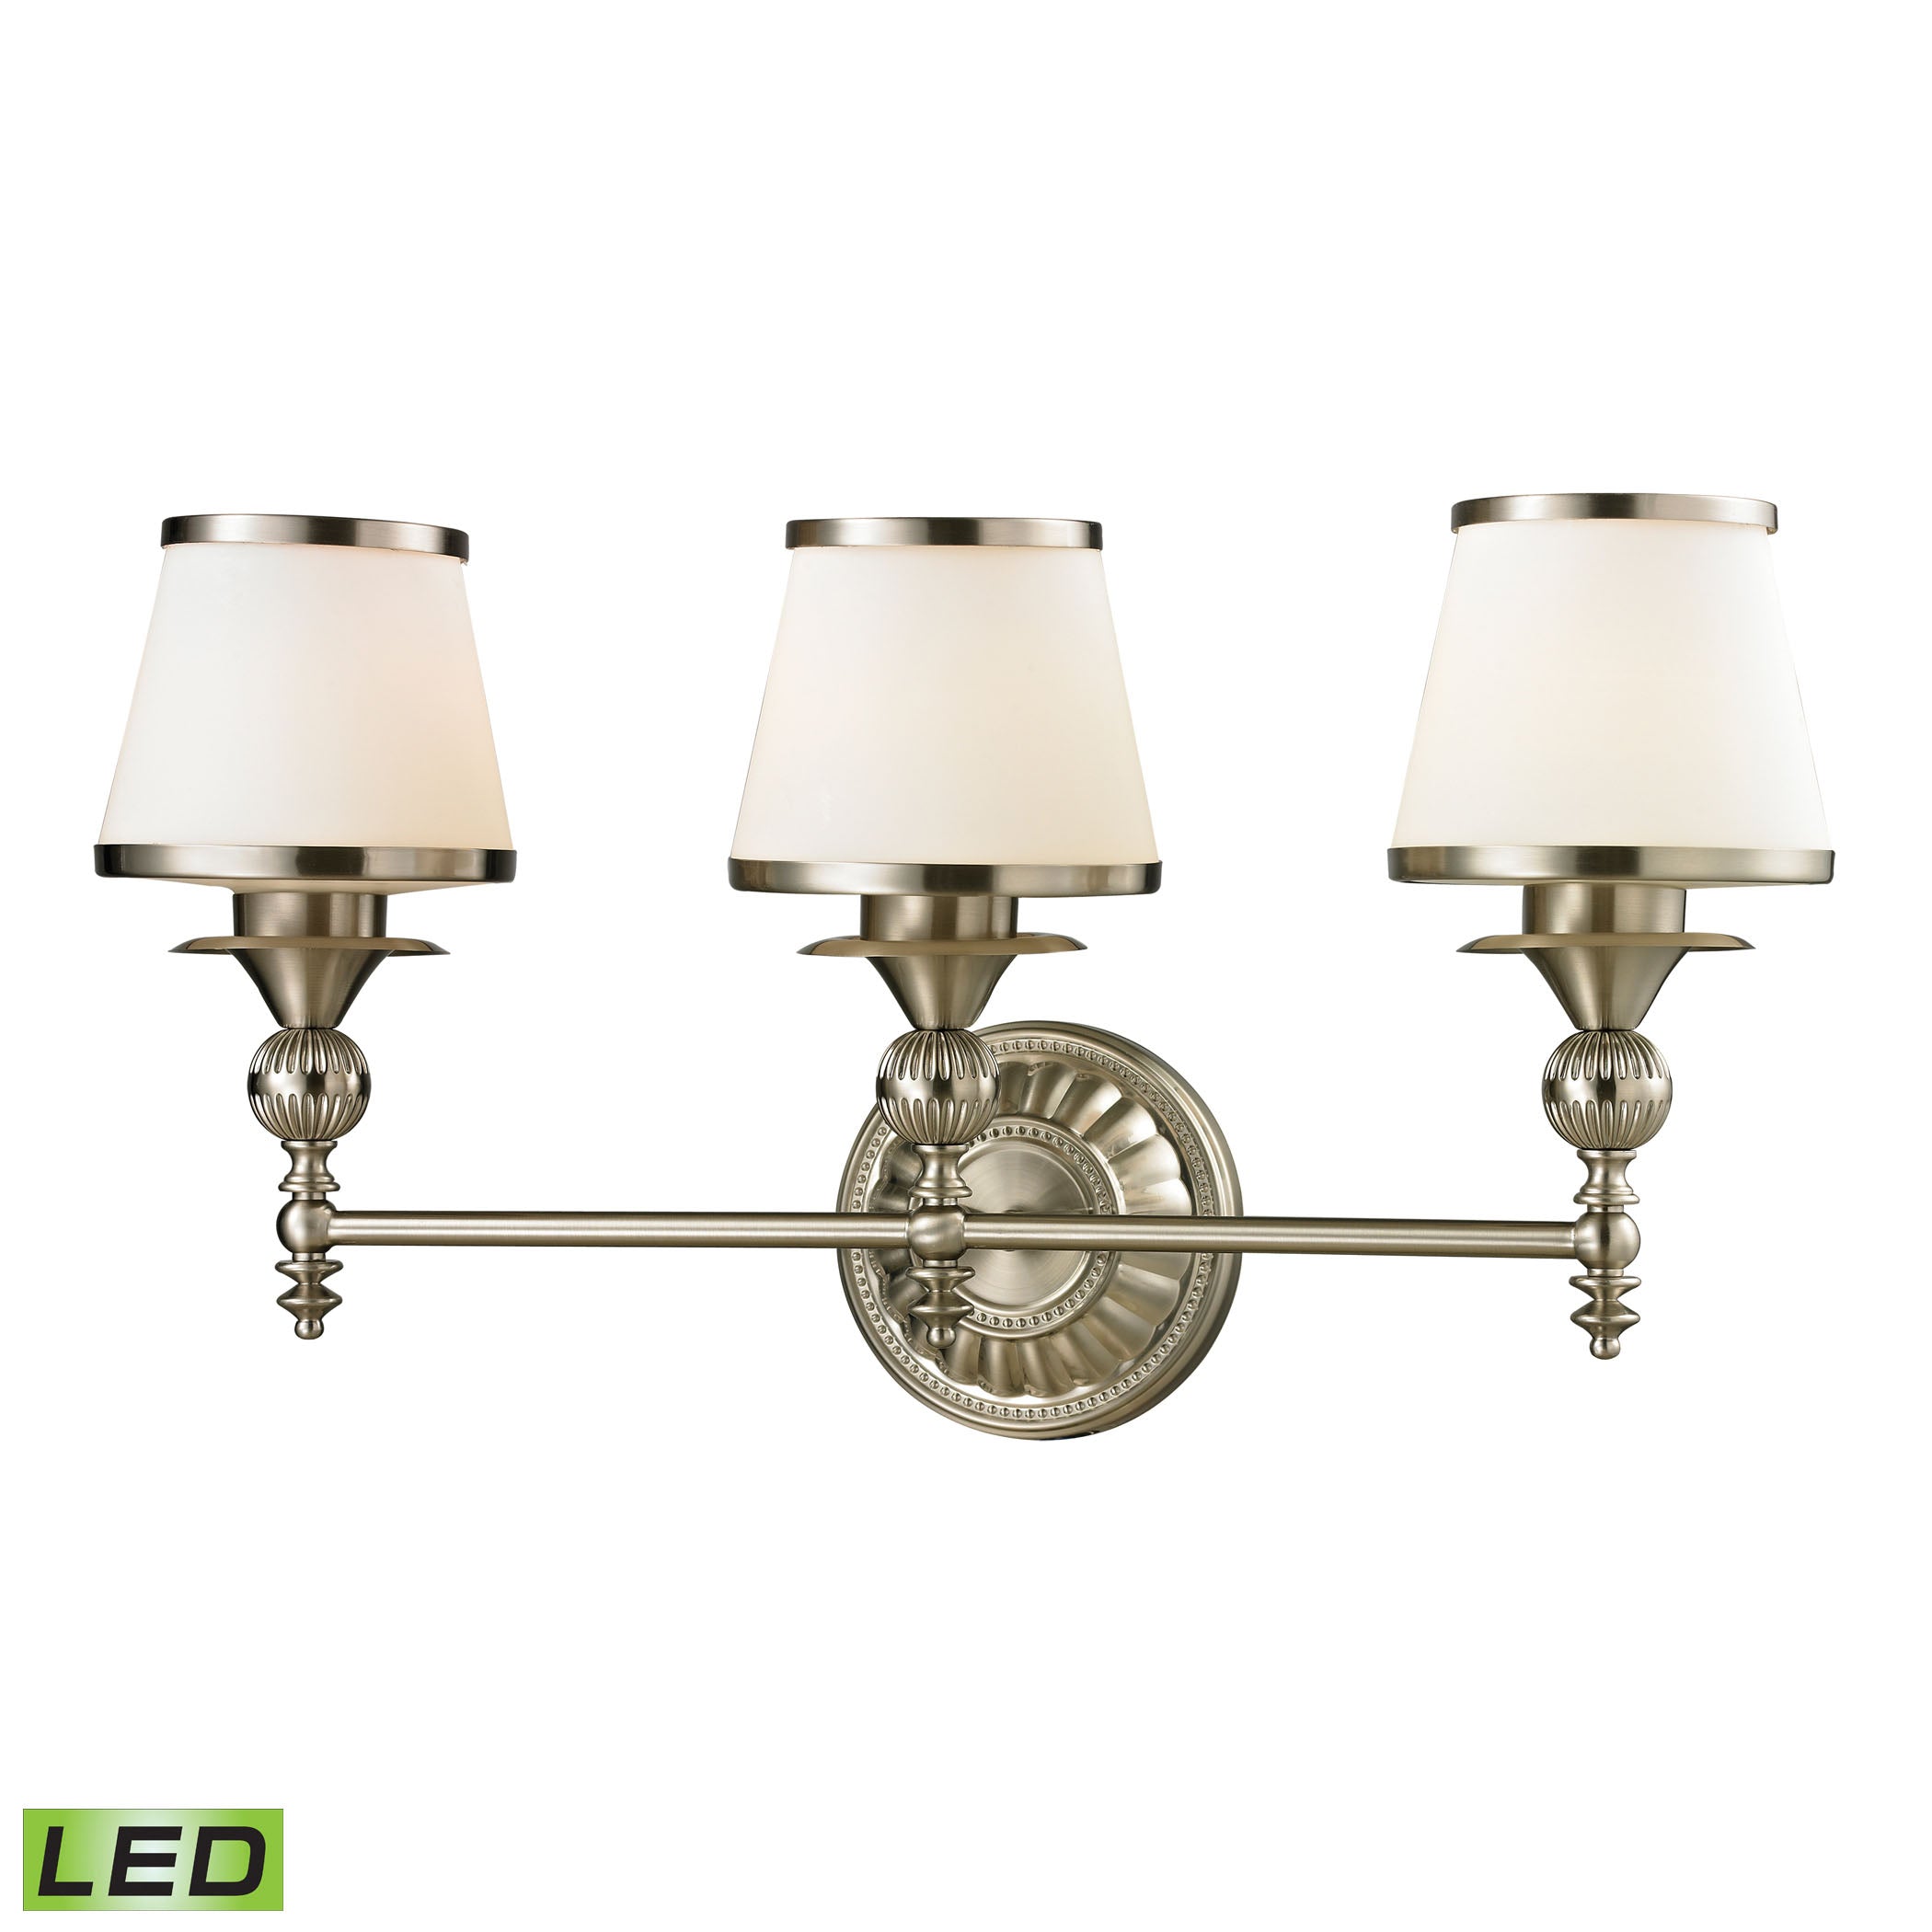 ELK Lighting 11602/3-LED Smithfield 3-Light Vanity Lamp in Brushed Nickel with Opal White Blown Glass - Includes LED Bulbs